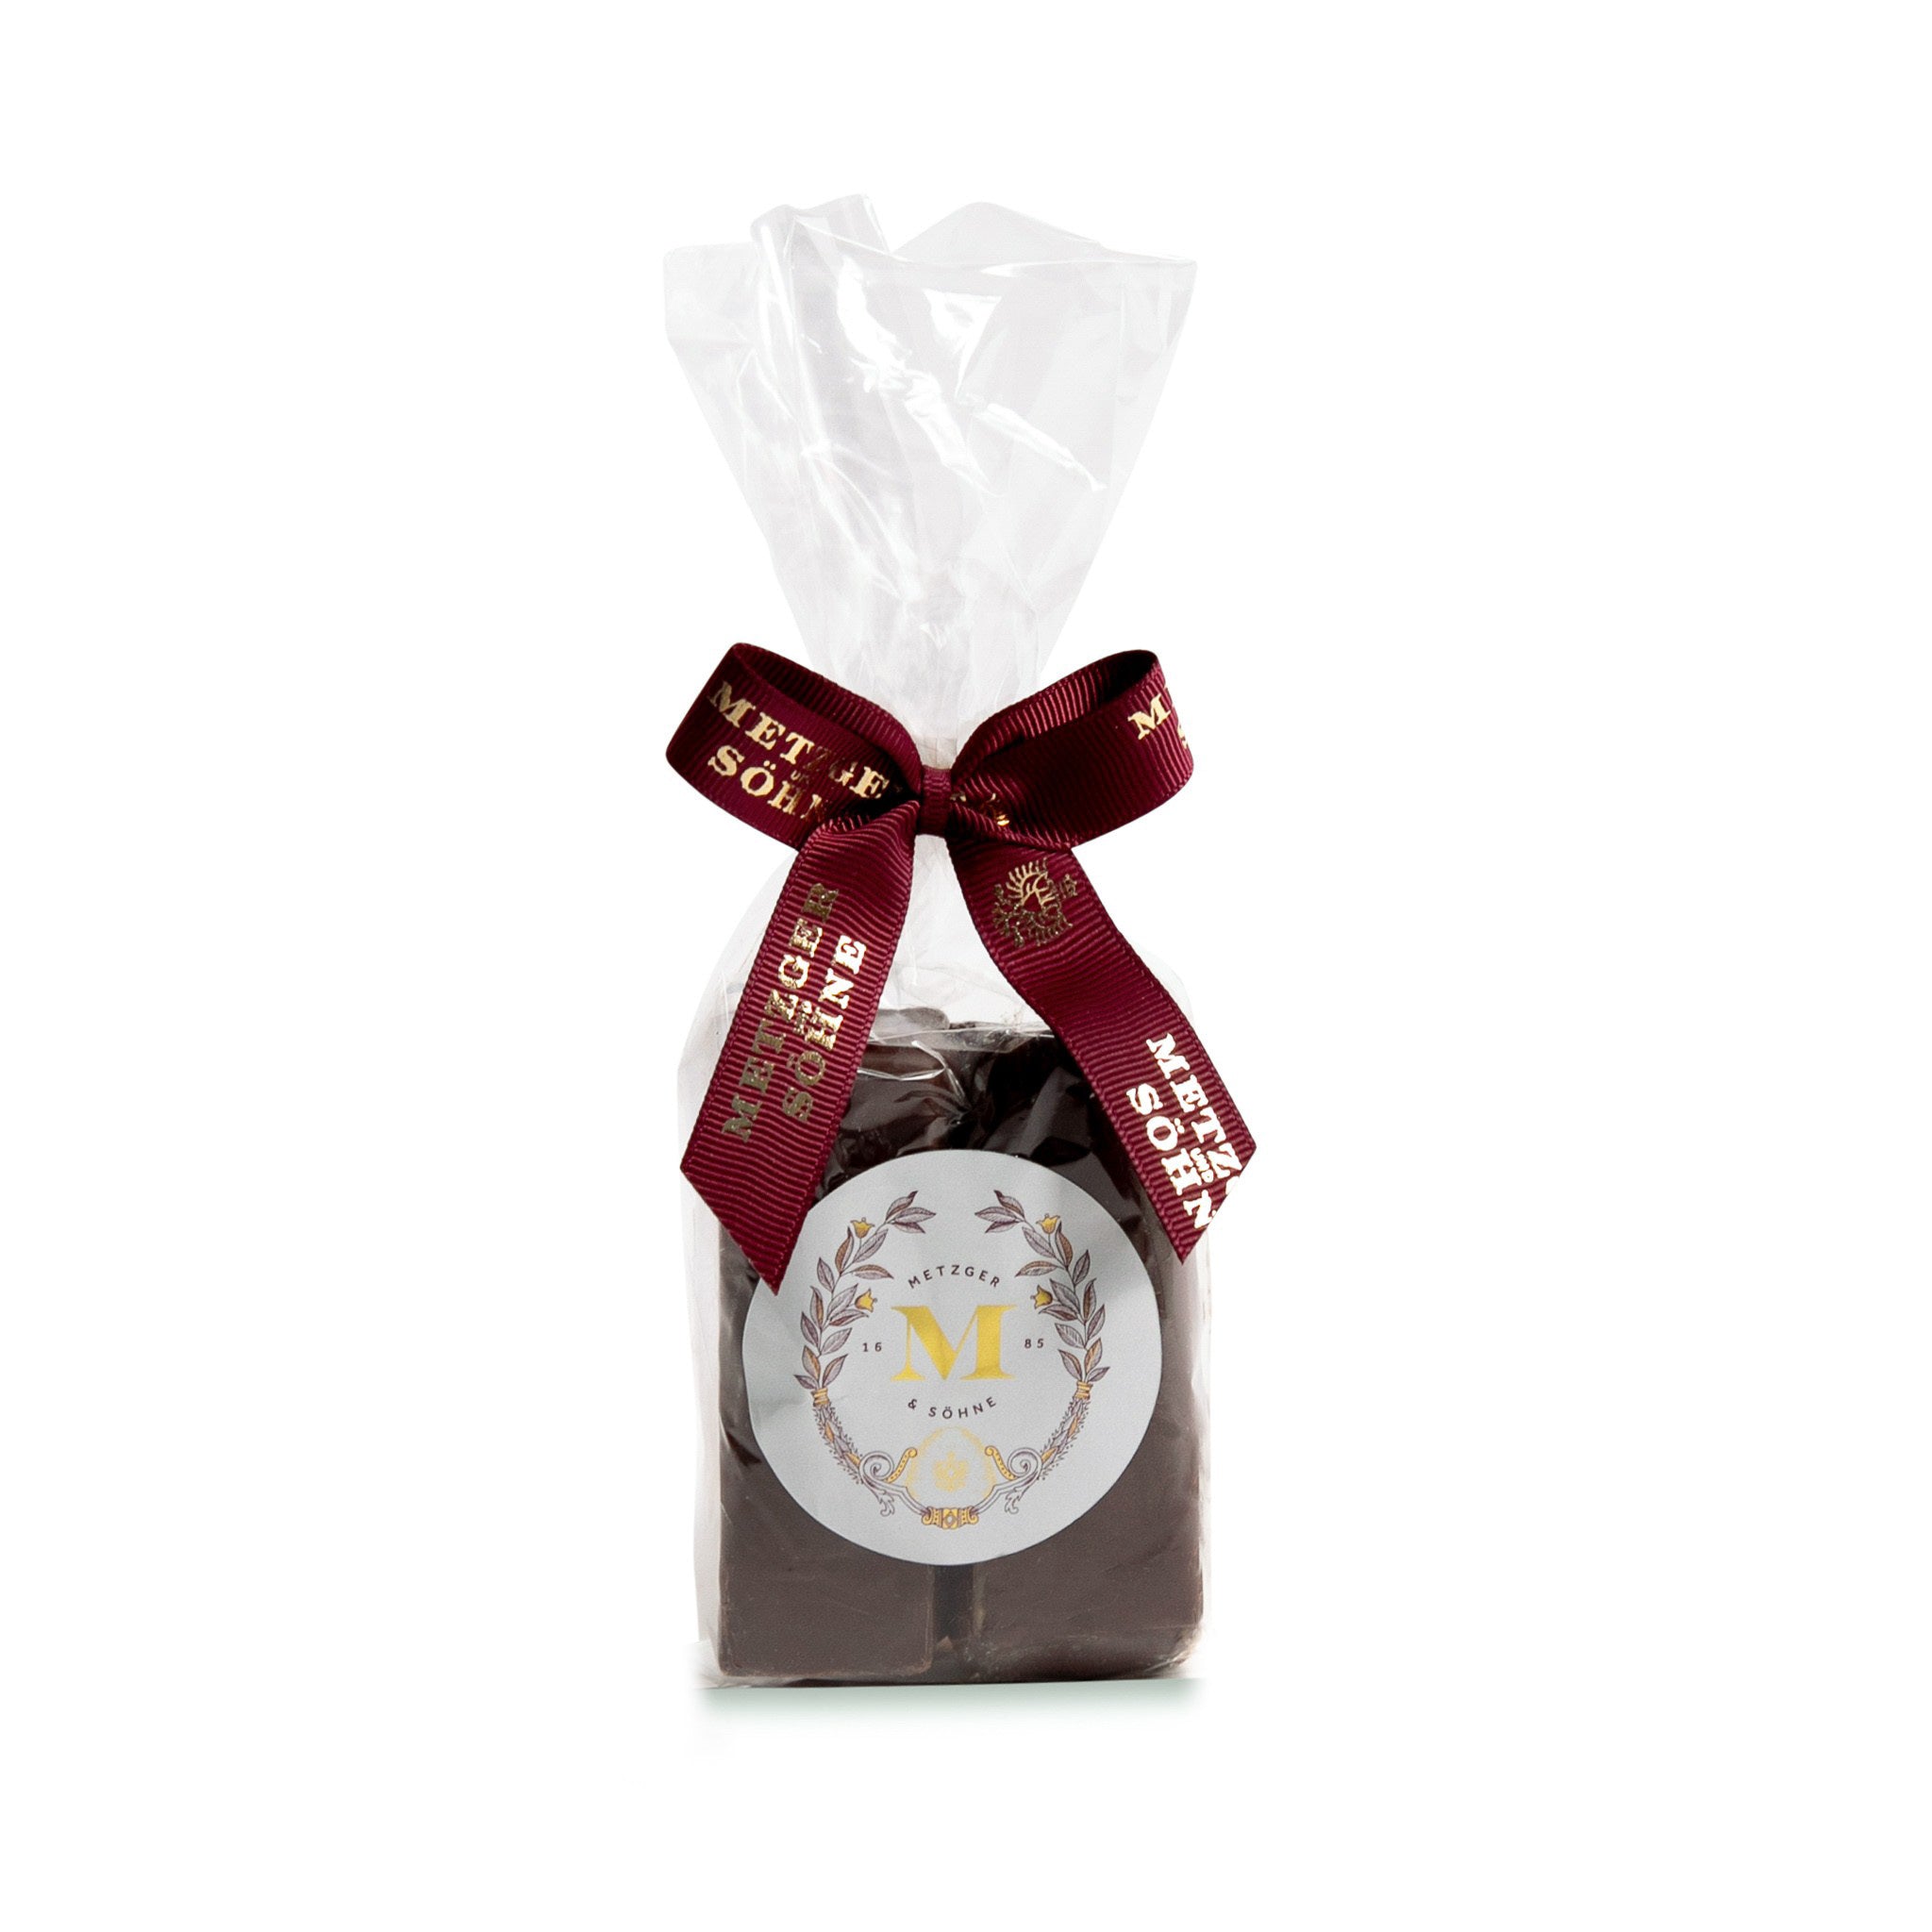 Two delectable Lebkuchen chocolate teasticks with sour cherry jelly, coated in a delicate dark couverture. The high quality chocolate enchants with an intense taste, perfectly complimenting our Lebkuchen and cherry jelly. A tasty stocking filler that can be enjoyed at teatime, or anytime!